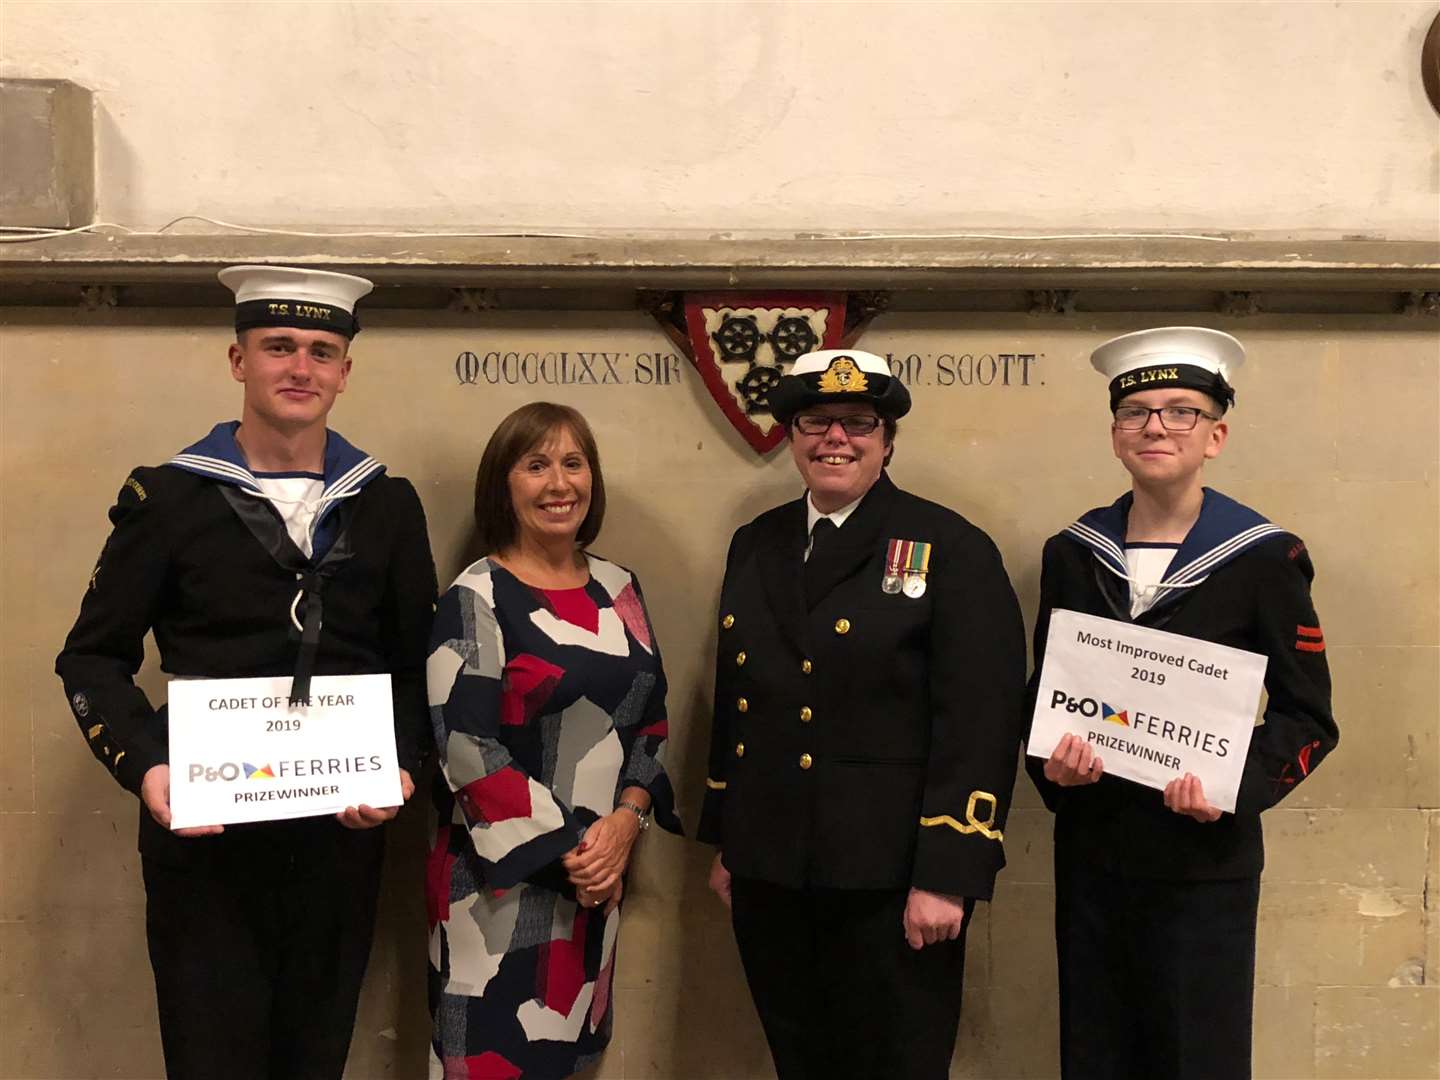 Dover & Deal Sea Cadets Nathan Clark and James McCann are presented with the P&O bursary by Lifeboat press officer Noelle Downer, watched by Sarah Butler, incumbent commanding officer